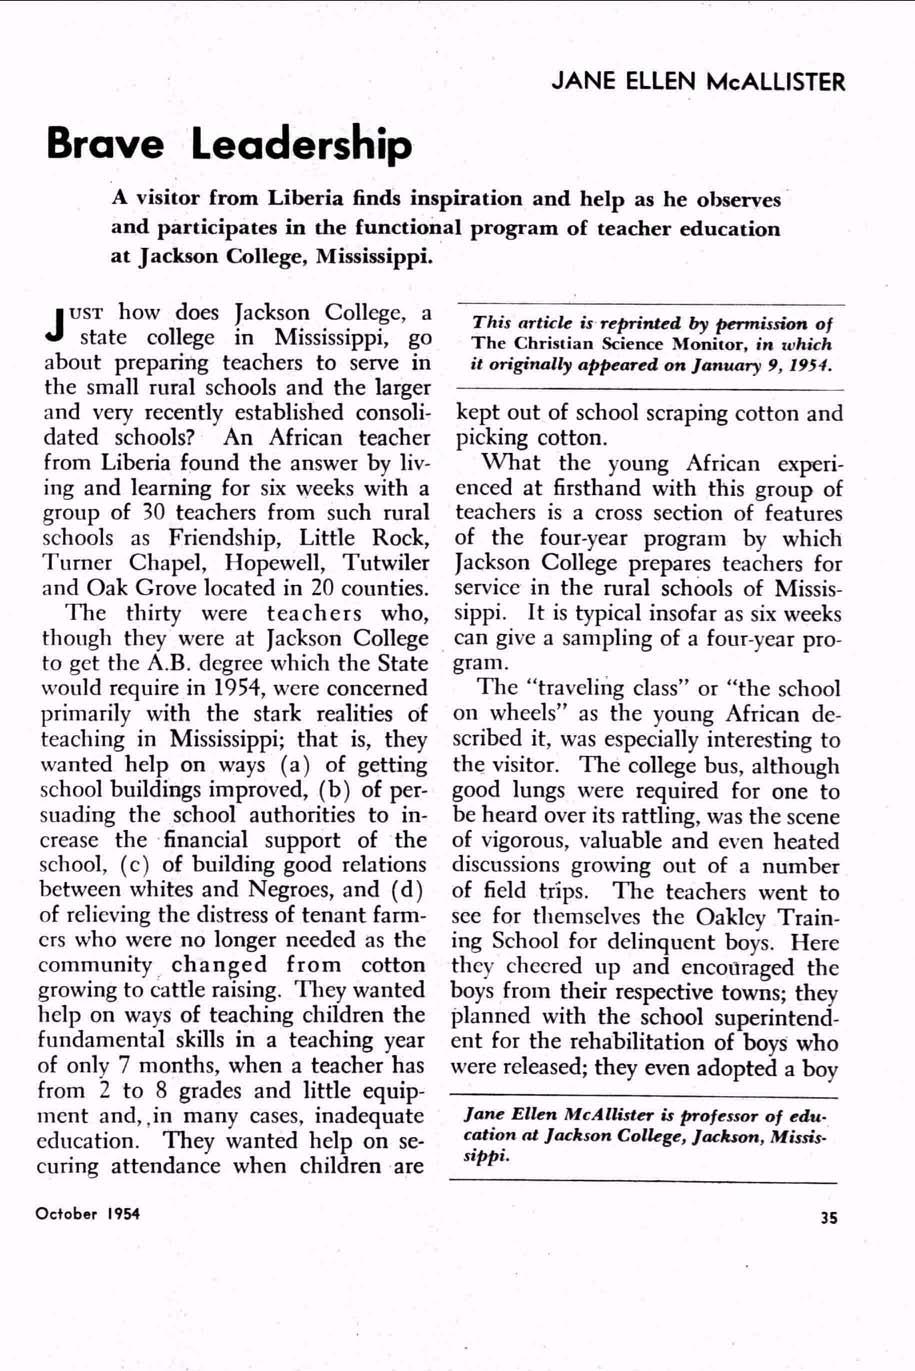 UST how does Jackson College, a J state college in Mississippi, go about preparing teachers to serve in the small rural schools and the larger and very recently established consoli dated schools?